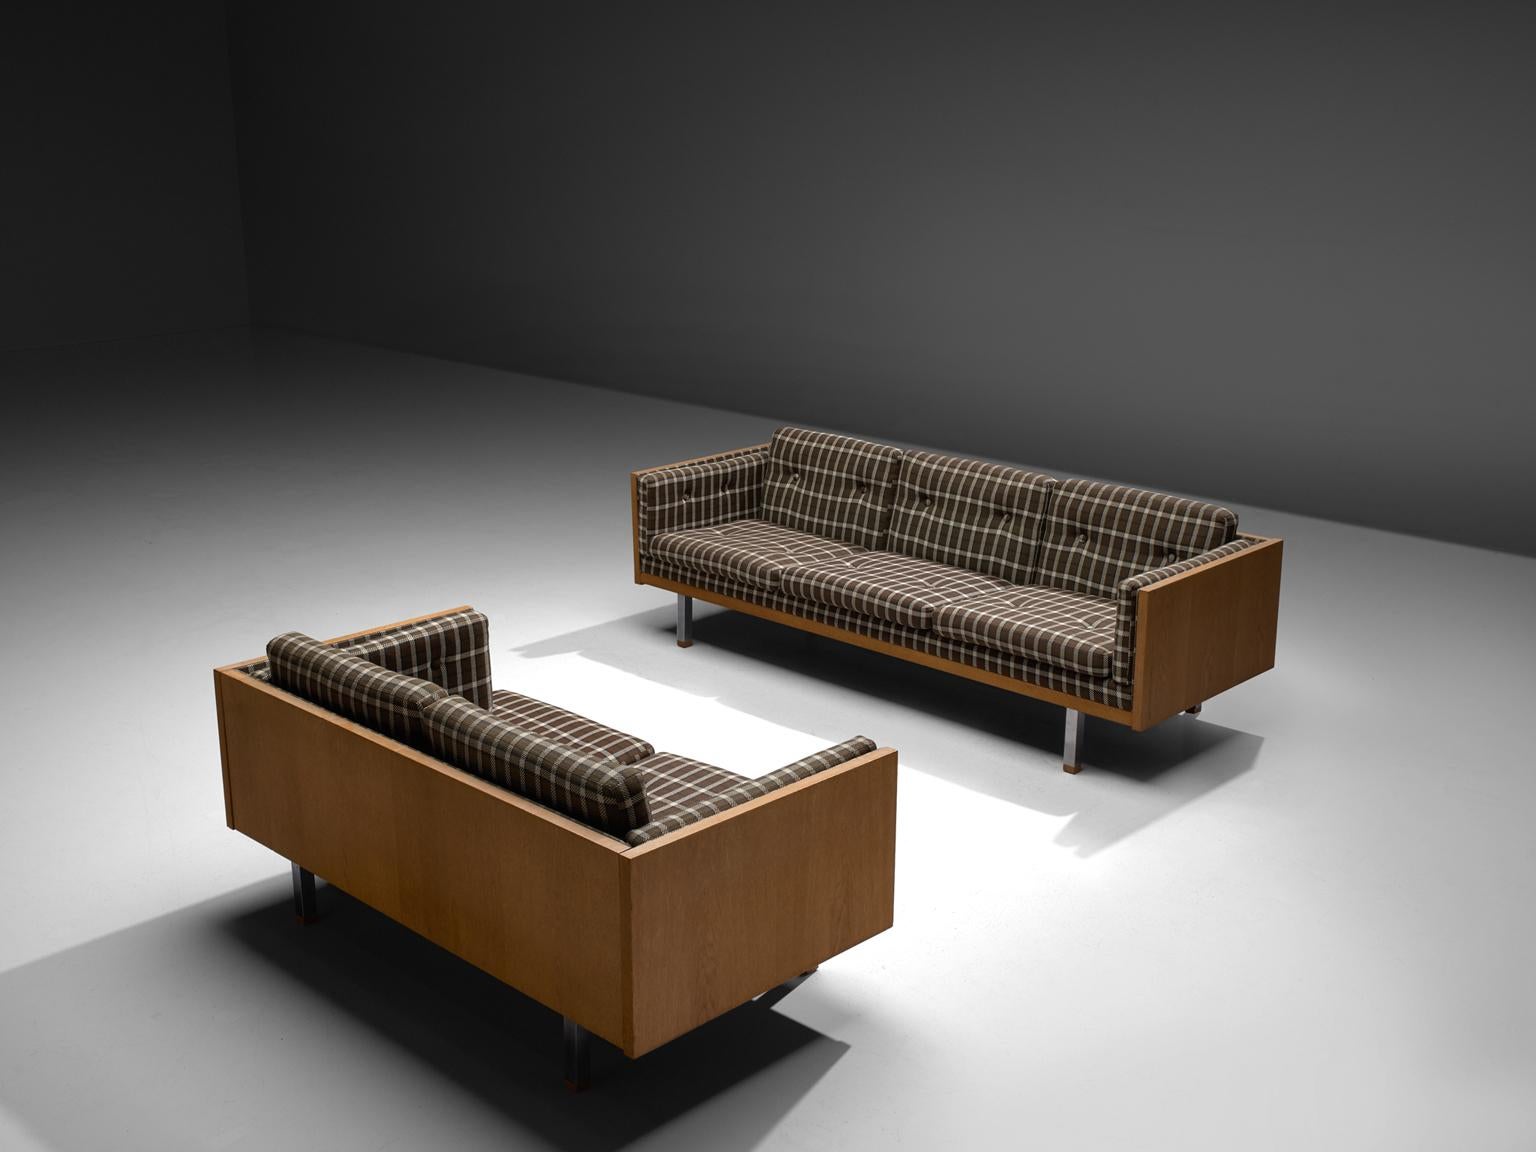 Jydsk Mobelvaerk, three and two-seat sofa, in oak, metal and fabric, Denmark, 1960s.

Scandinavian living room set, a two and three-seat sofa. The frame consist of oak with cubic metal legs, which provide an open look to the quite solid seating of